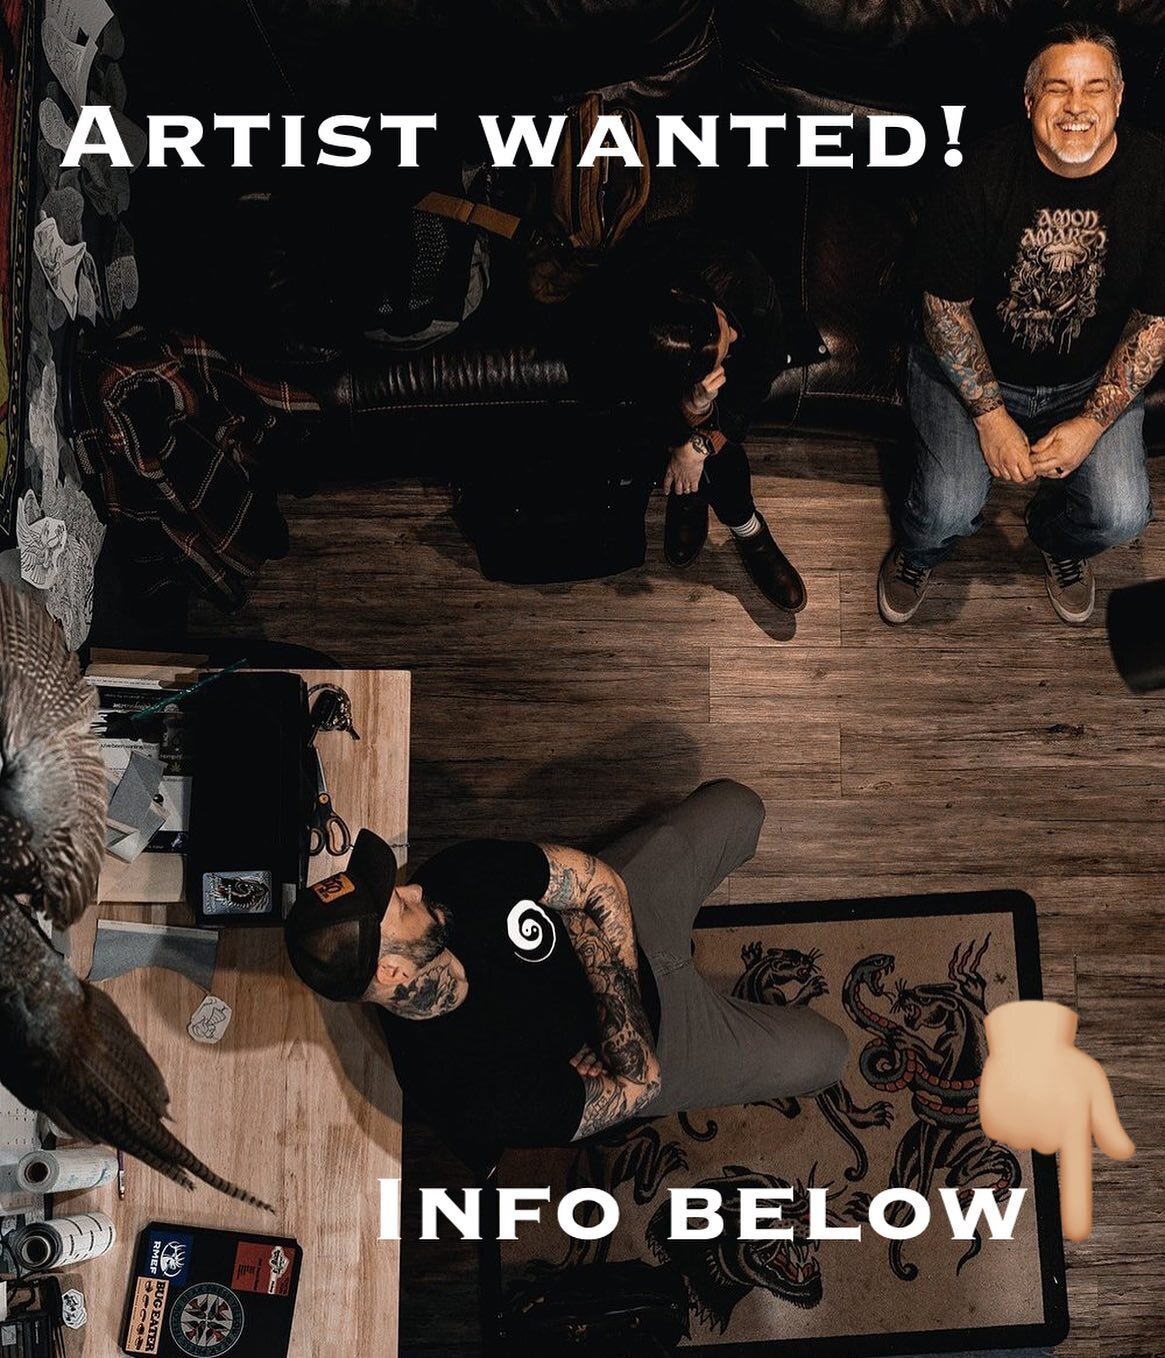 Lost creek Tattoo is looking for an artist! Our shop is growing and we can not keep up with the traffic, looking for a tattooer to join our team. No apprenticeships, must have five years experience and be willing to do walkins. We are a busy studio l